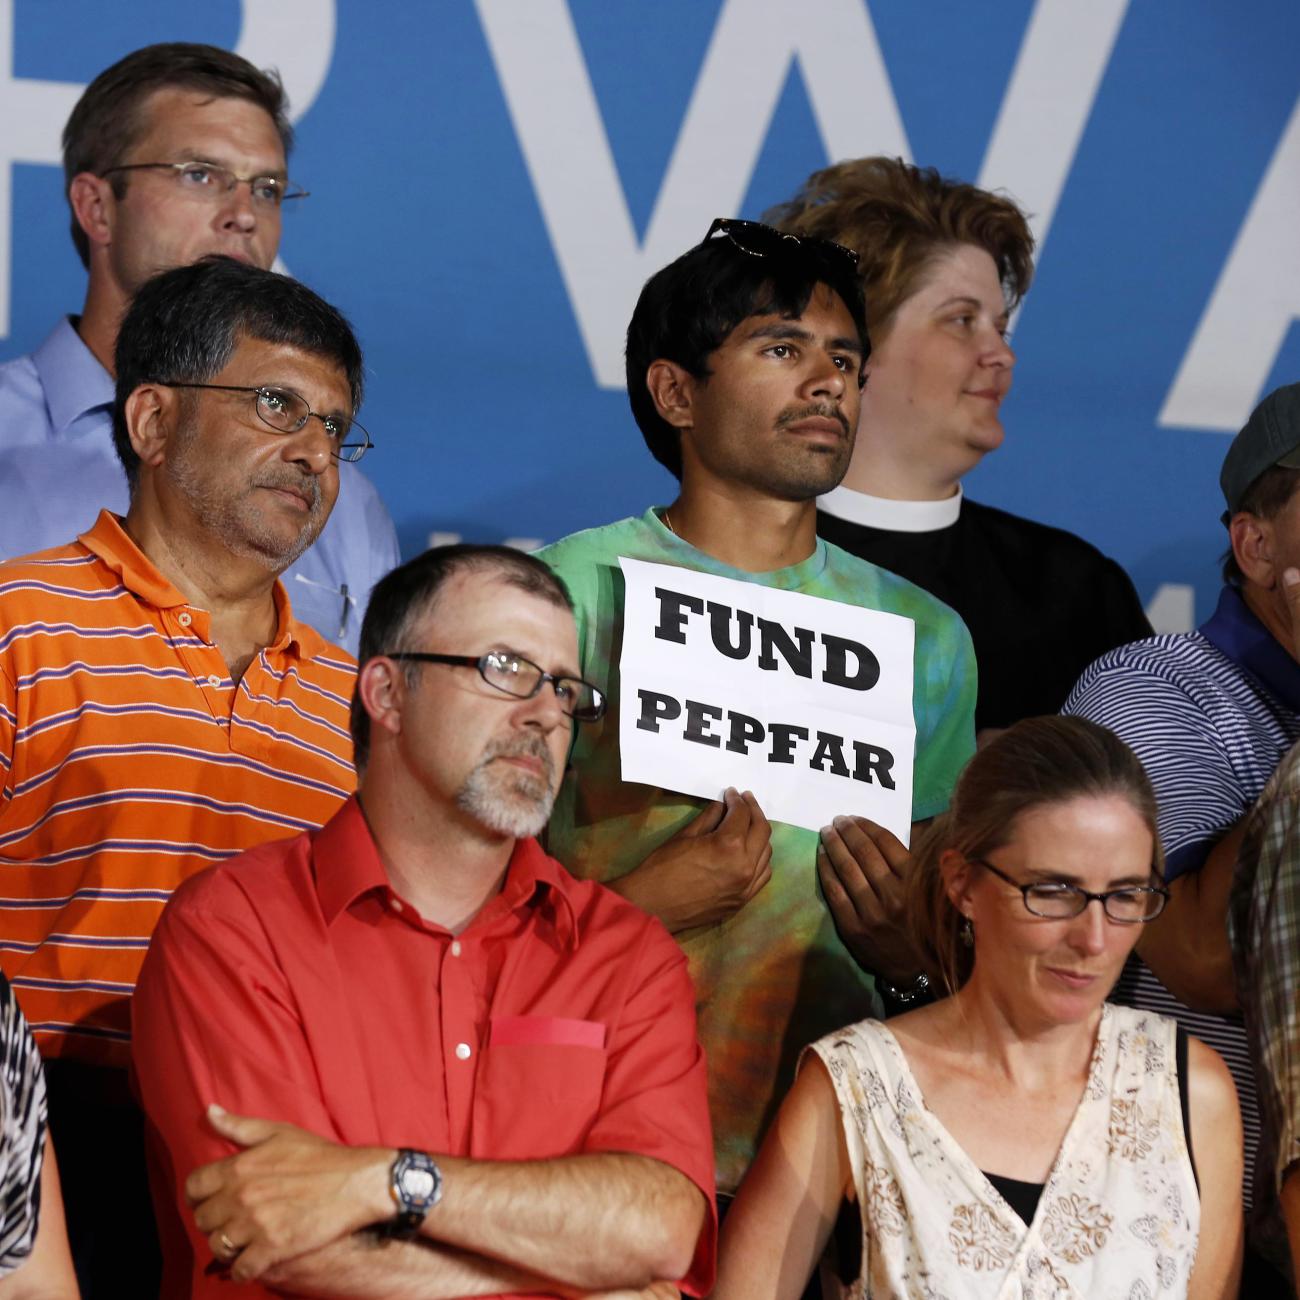 An audience member holds up a "Fund PEPFAR" sign, during President Barack Obama's speech at a campaign event at Herman Park in Boone, Iowa, on August 13, 2012. 